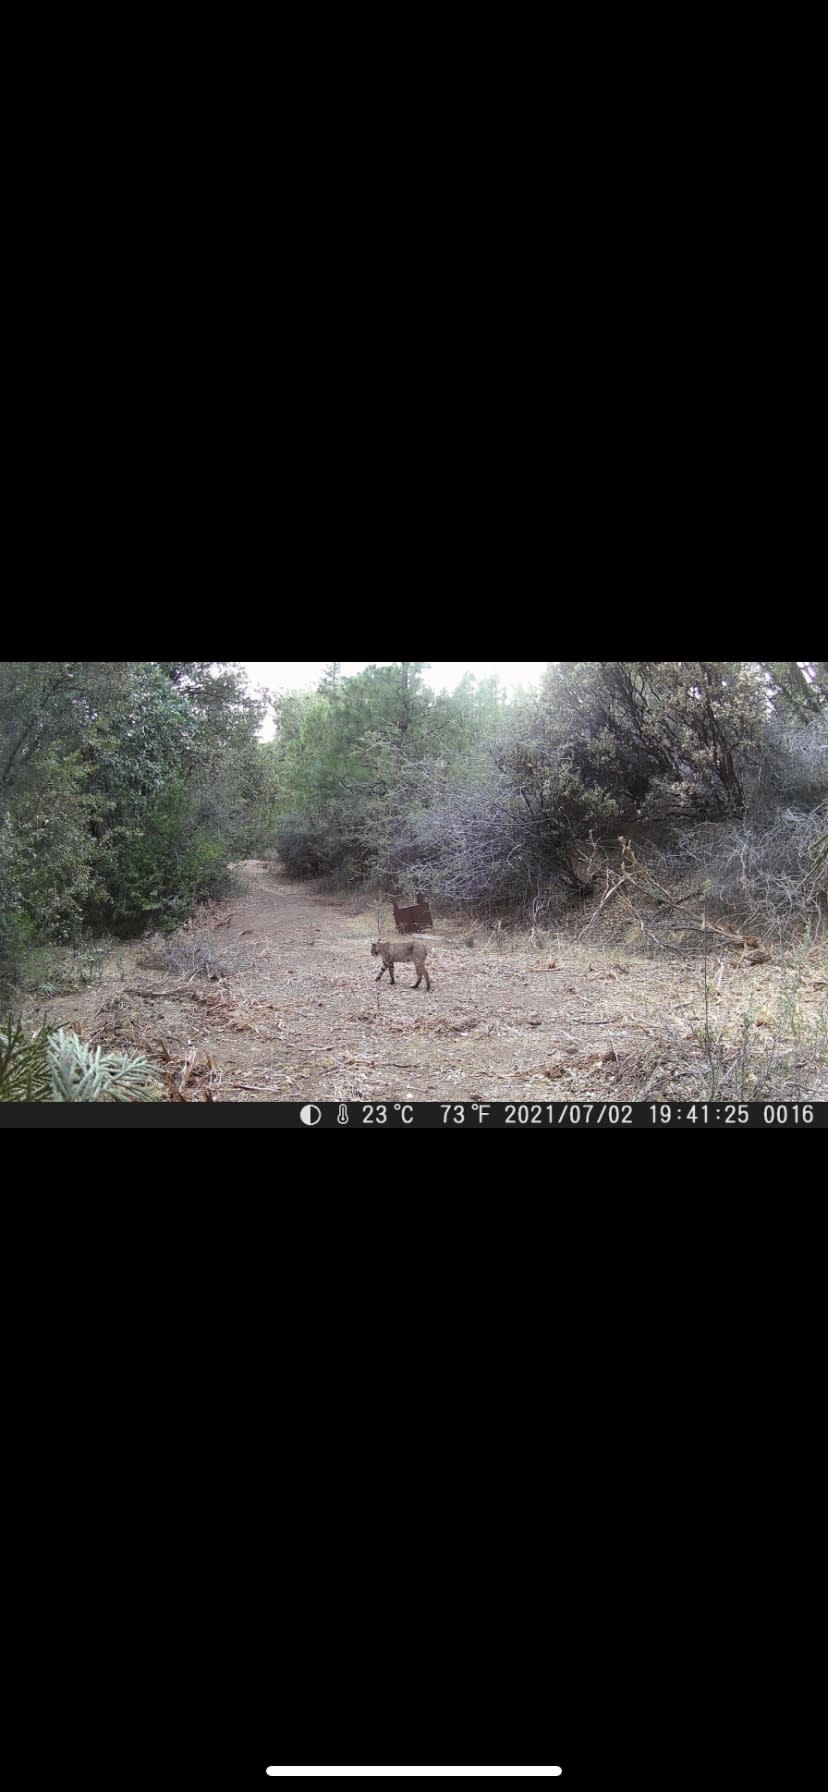 Bobcats are typically not scene. They try and avoid human contact but our game can caught this one taking a stroll.